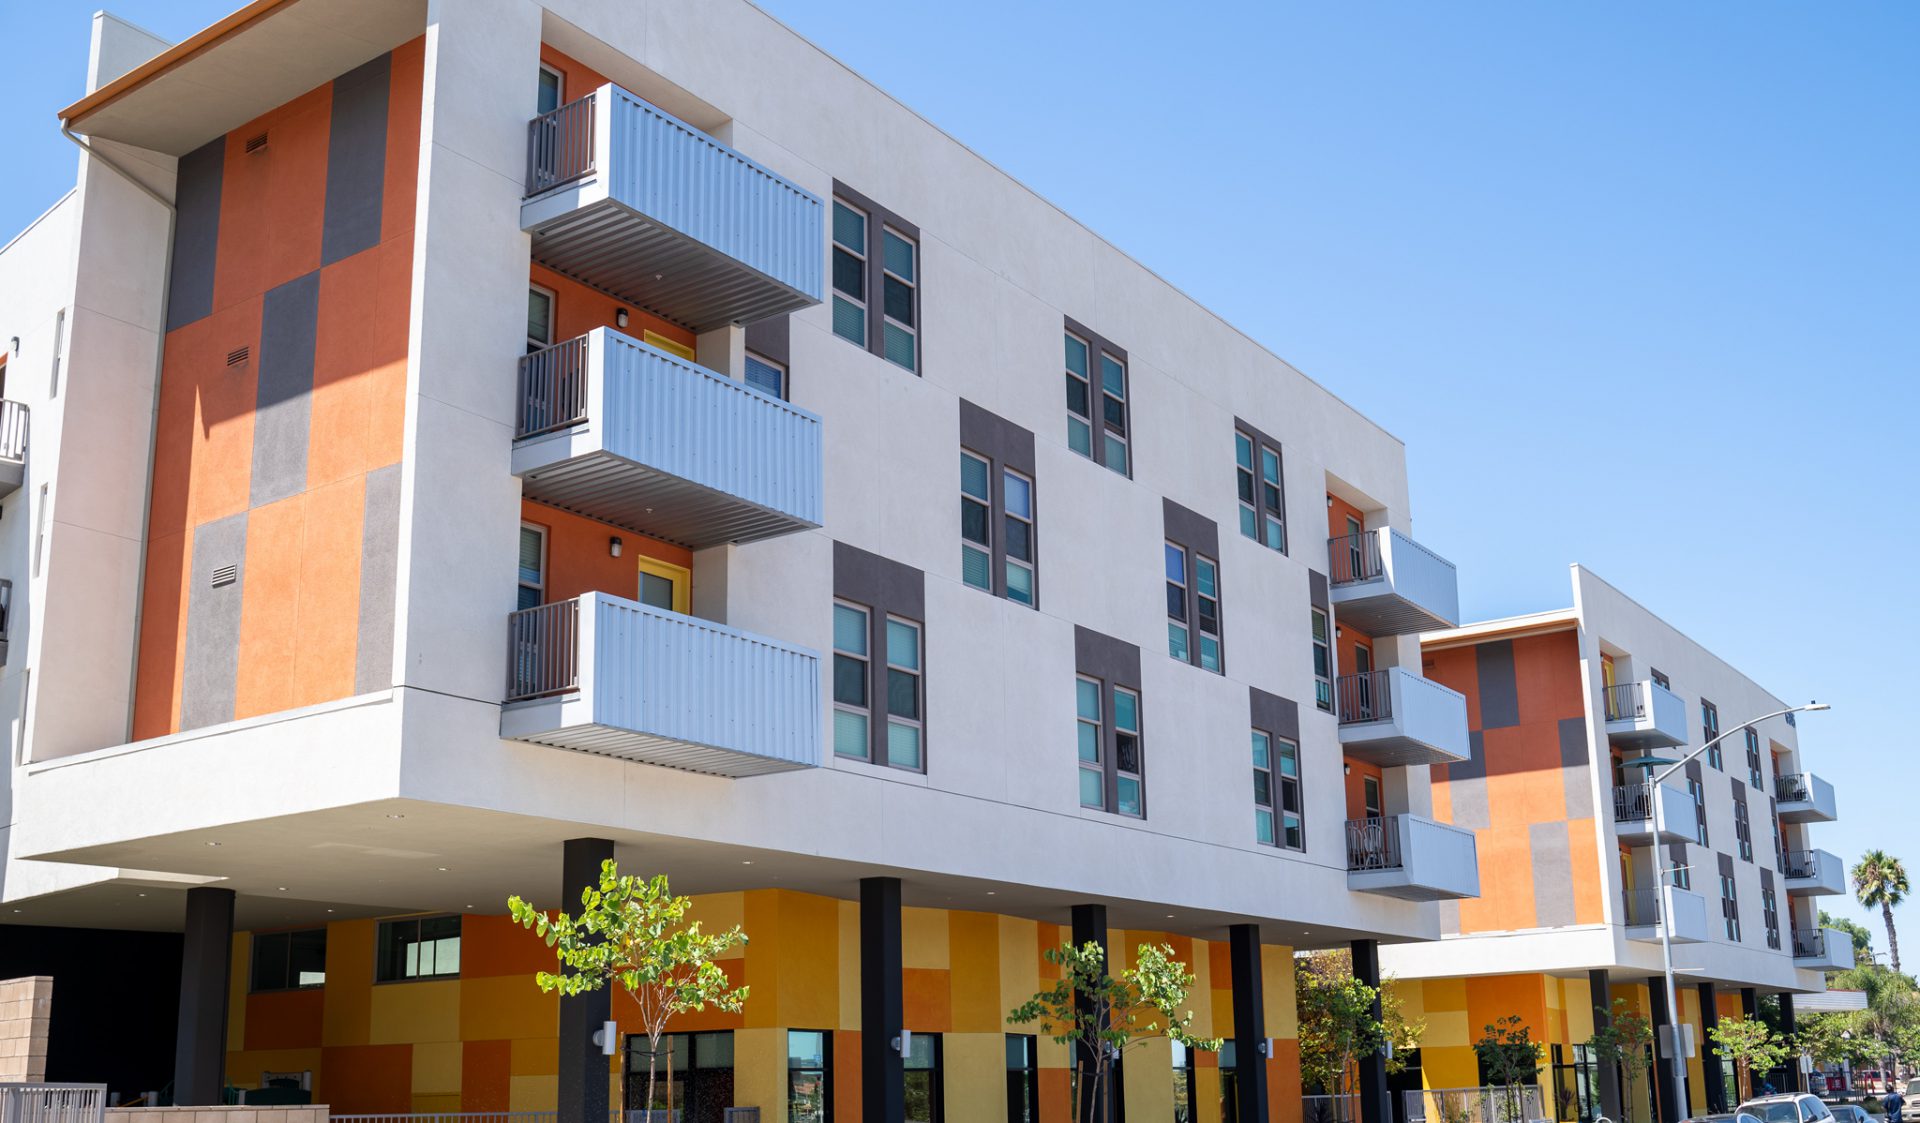 65 New Affordable Apartments in a Core Area of Encanto for Families